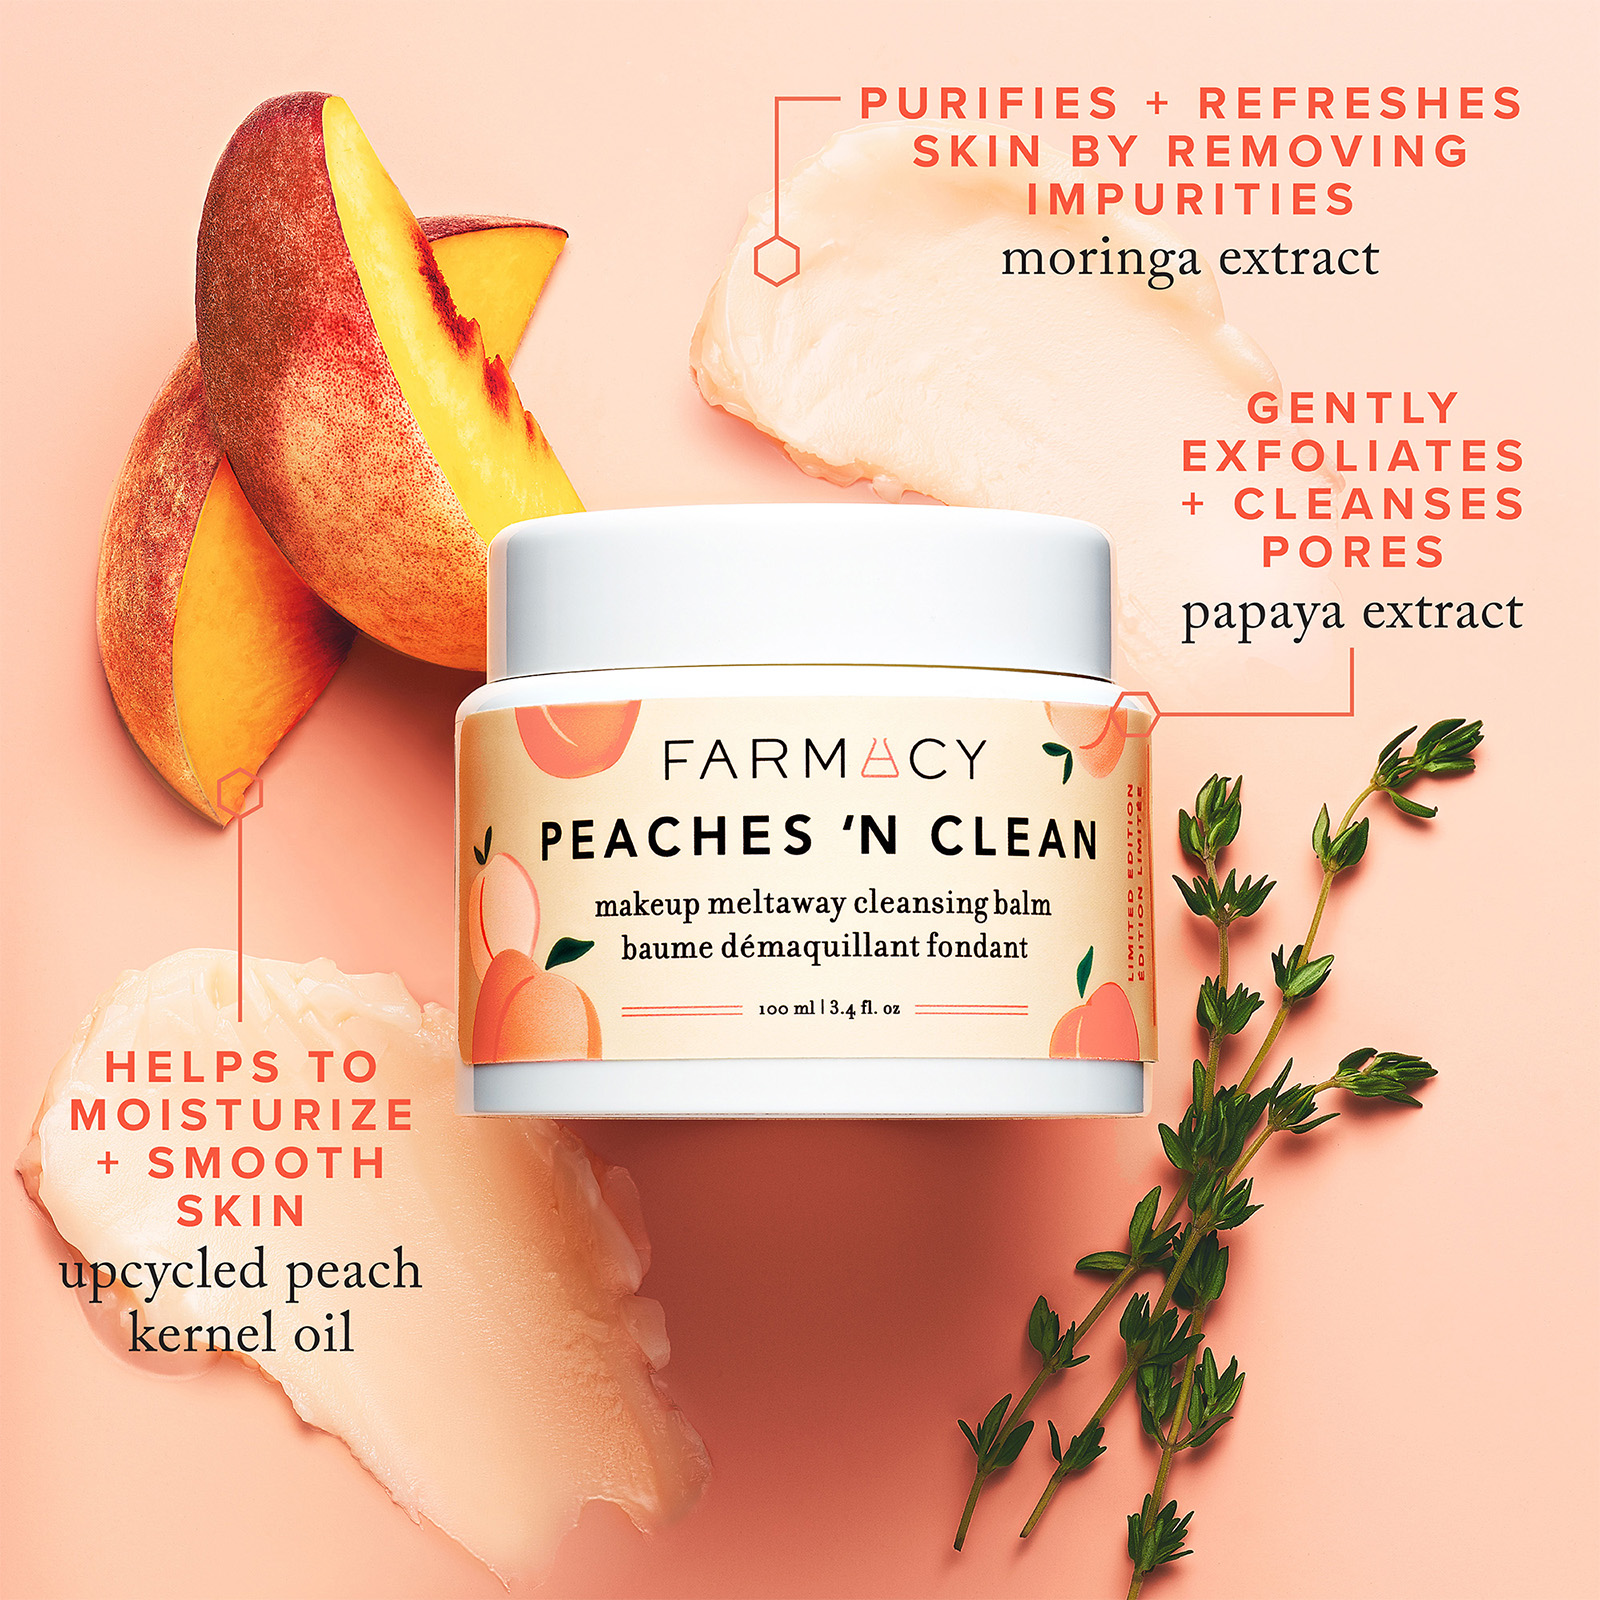 Purifies and refreshes skin by removing impurities - moringa extract, gently exfoliates and cleanses pores - papaya extract, helps to moisturize and smooth skin - upcycled peach kernel oil